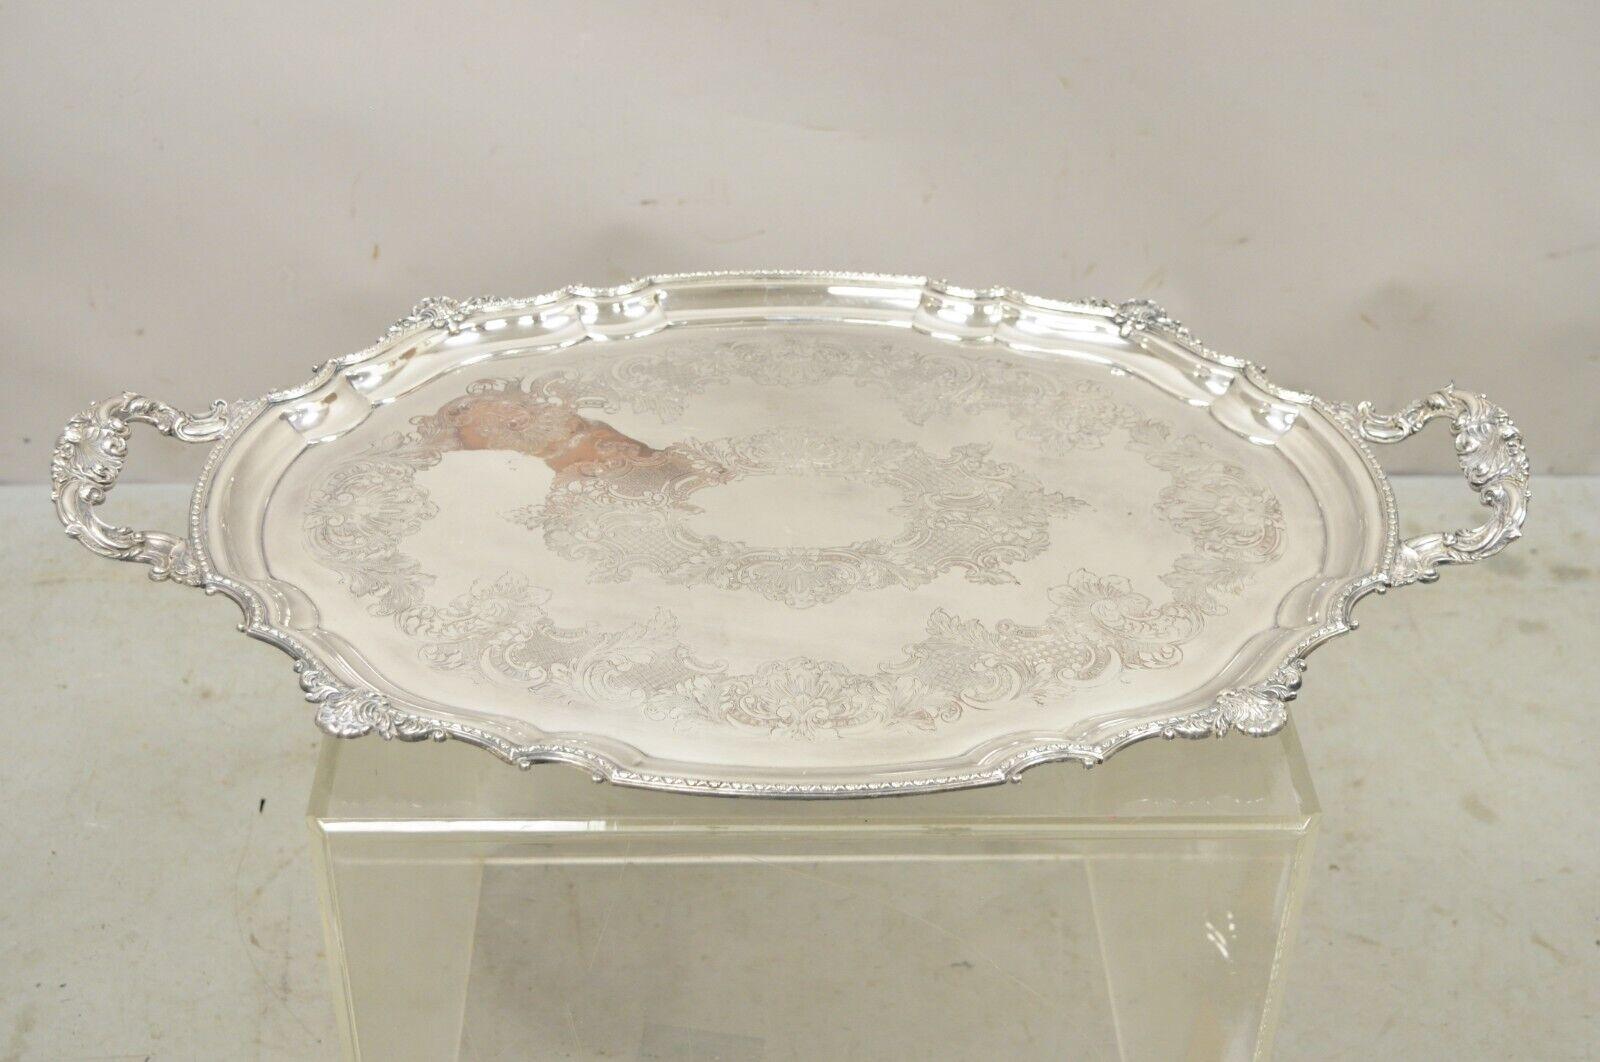 Antique English Victorian Silver Plated Ornate Oval Serving Platter Tray. Circa Early 1900s. Measurements: 2